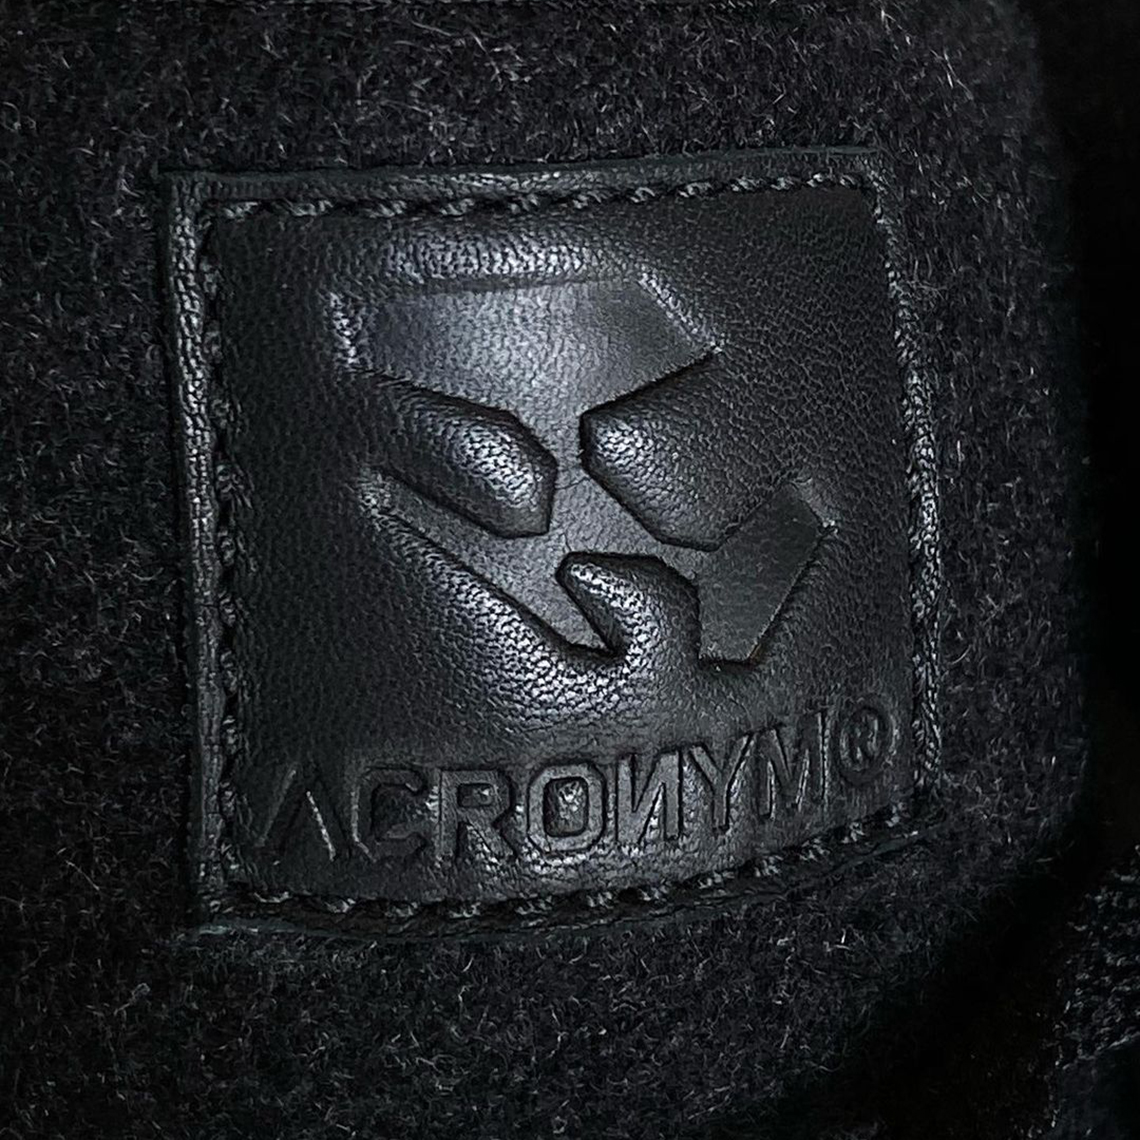 Acronym nike number BLUNK Sample Release Info 6